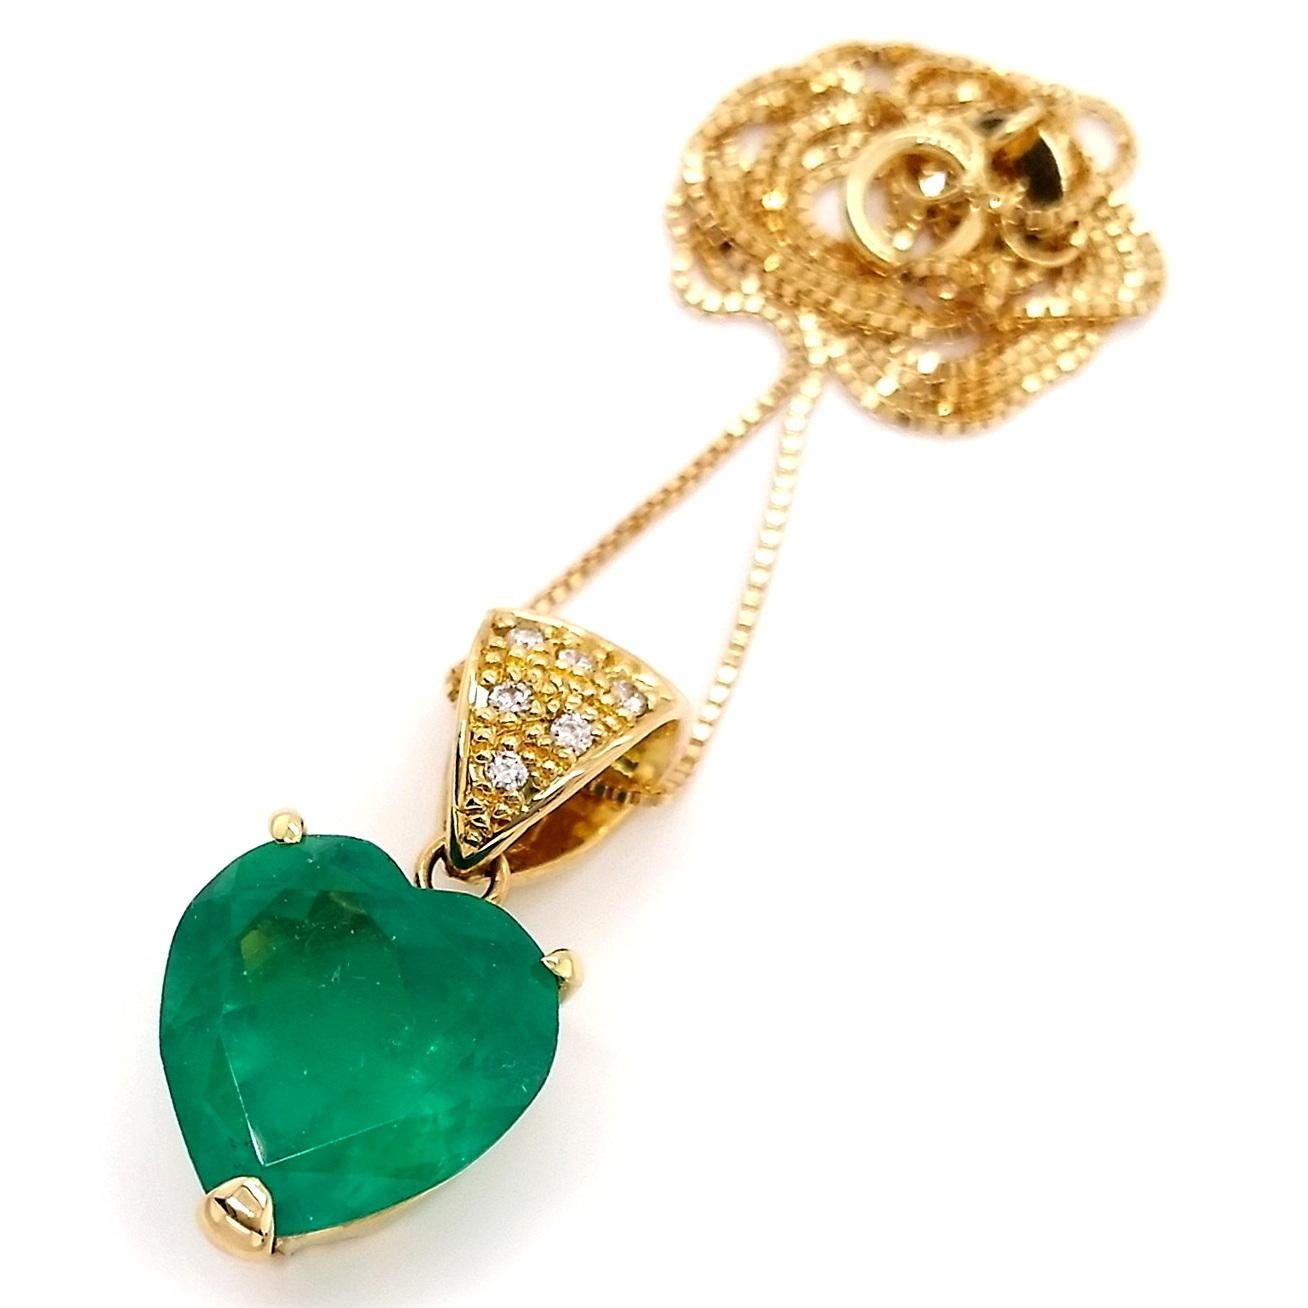 This splendid heart-shaped Colombian emerald pendant, from Top Crown Jewelry, has an intense bluish-green fine color quality and is adorned by natural round brilliant-cut diamonds suspended on a light decorated 18K yellow gold chain. 
The necklace